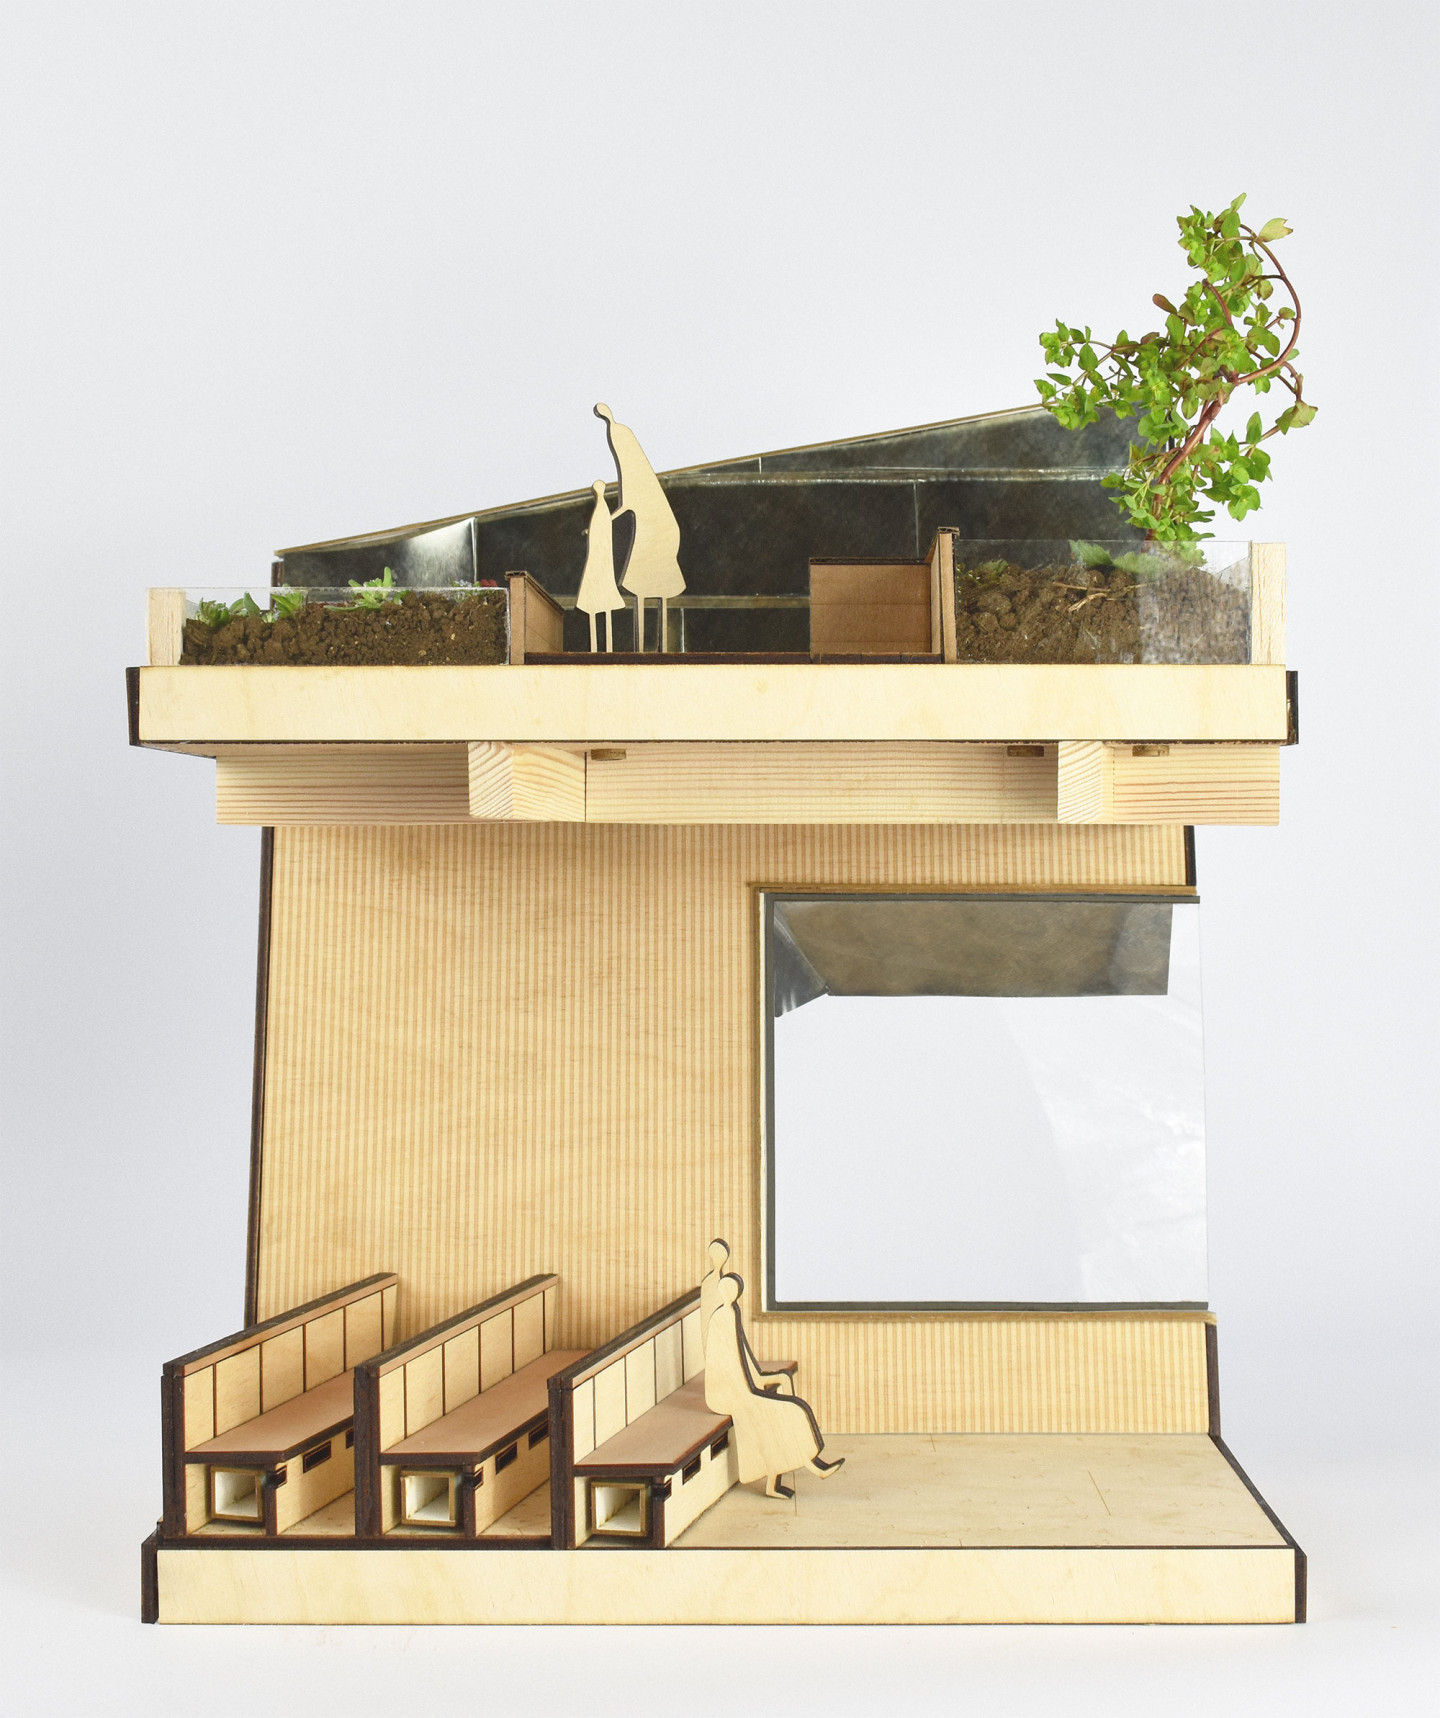 Sectional & Elevational Model through lecture Hall and Roof garden by Ryan Hillier, made from laser cut, ply/foamboard, acrylic, card zinc sheet and haematite.